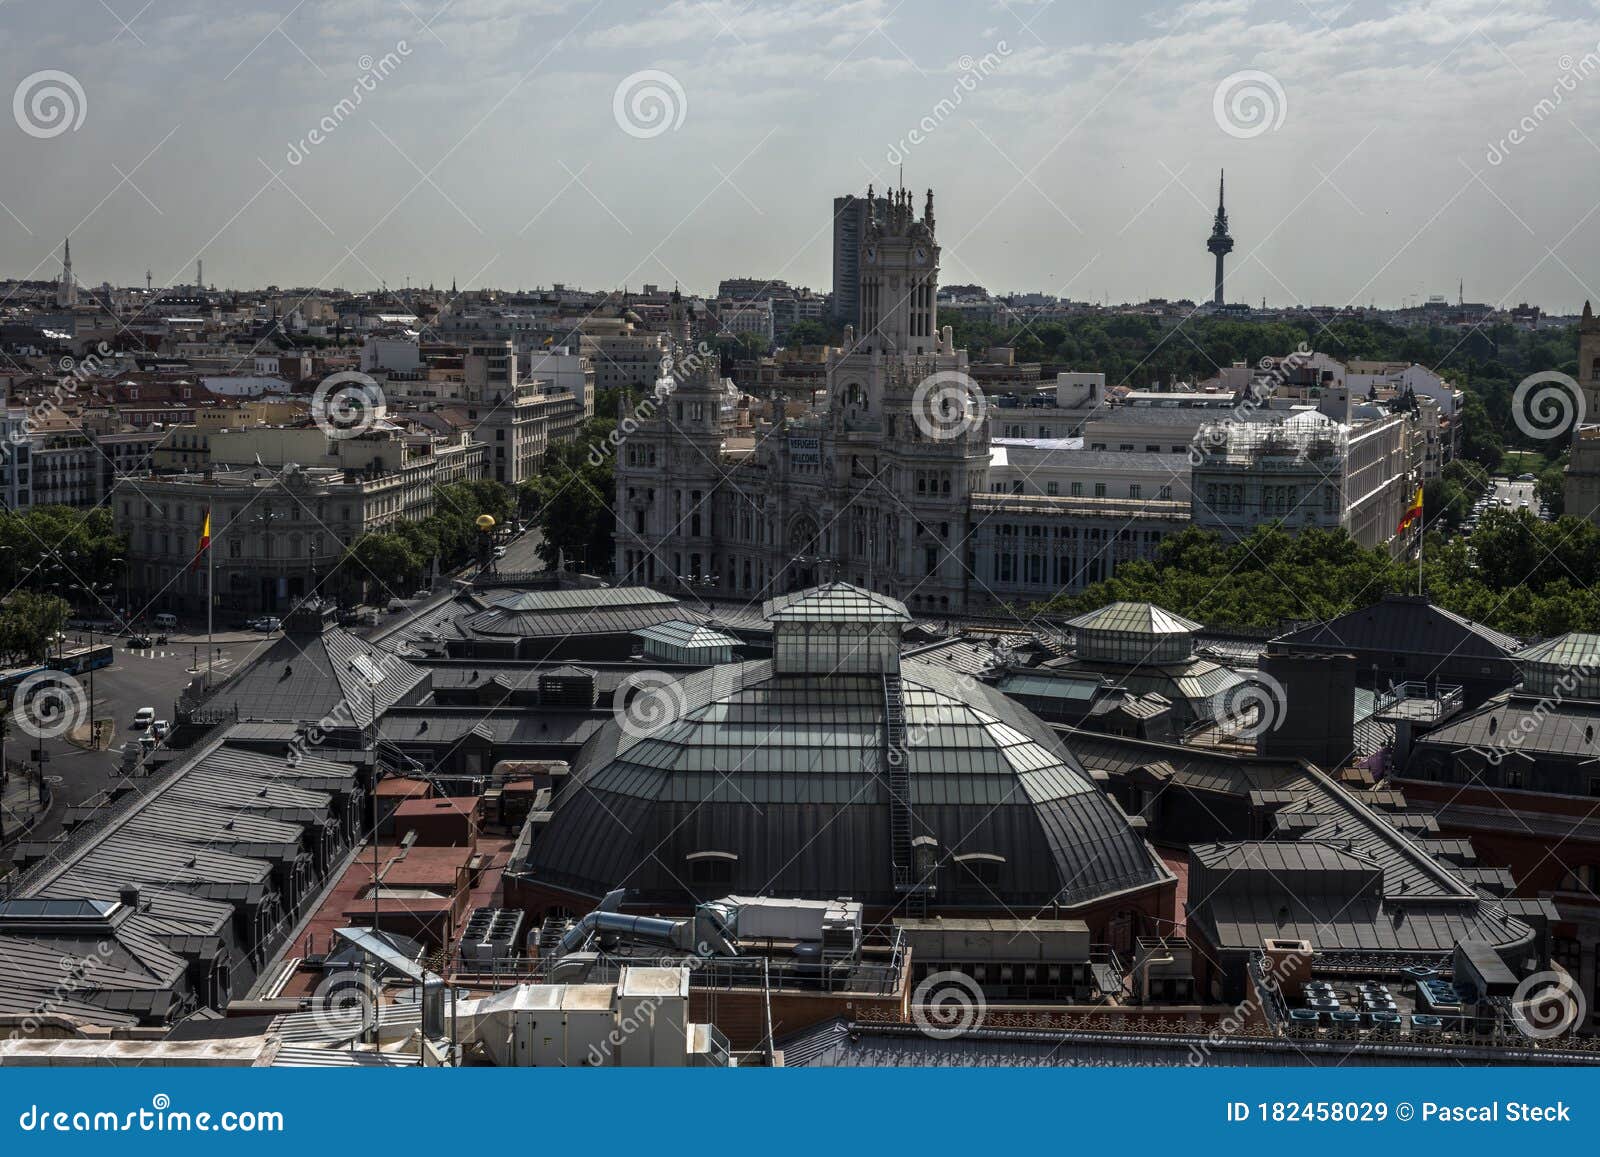 Summer Day in Capital of Spain Madrid Church Castle Tv Tower Stock Image -  Image of landscape, monument: 182458029